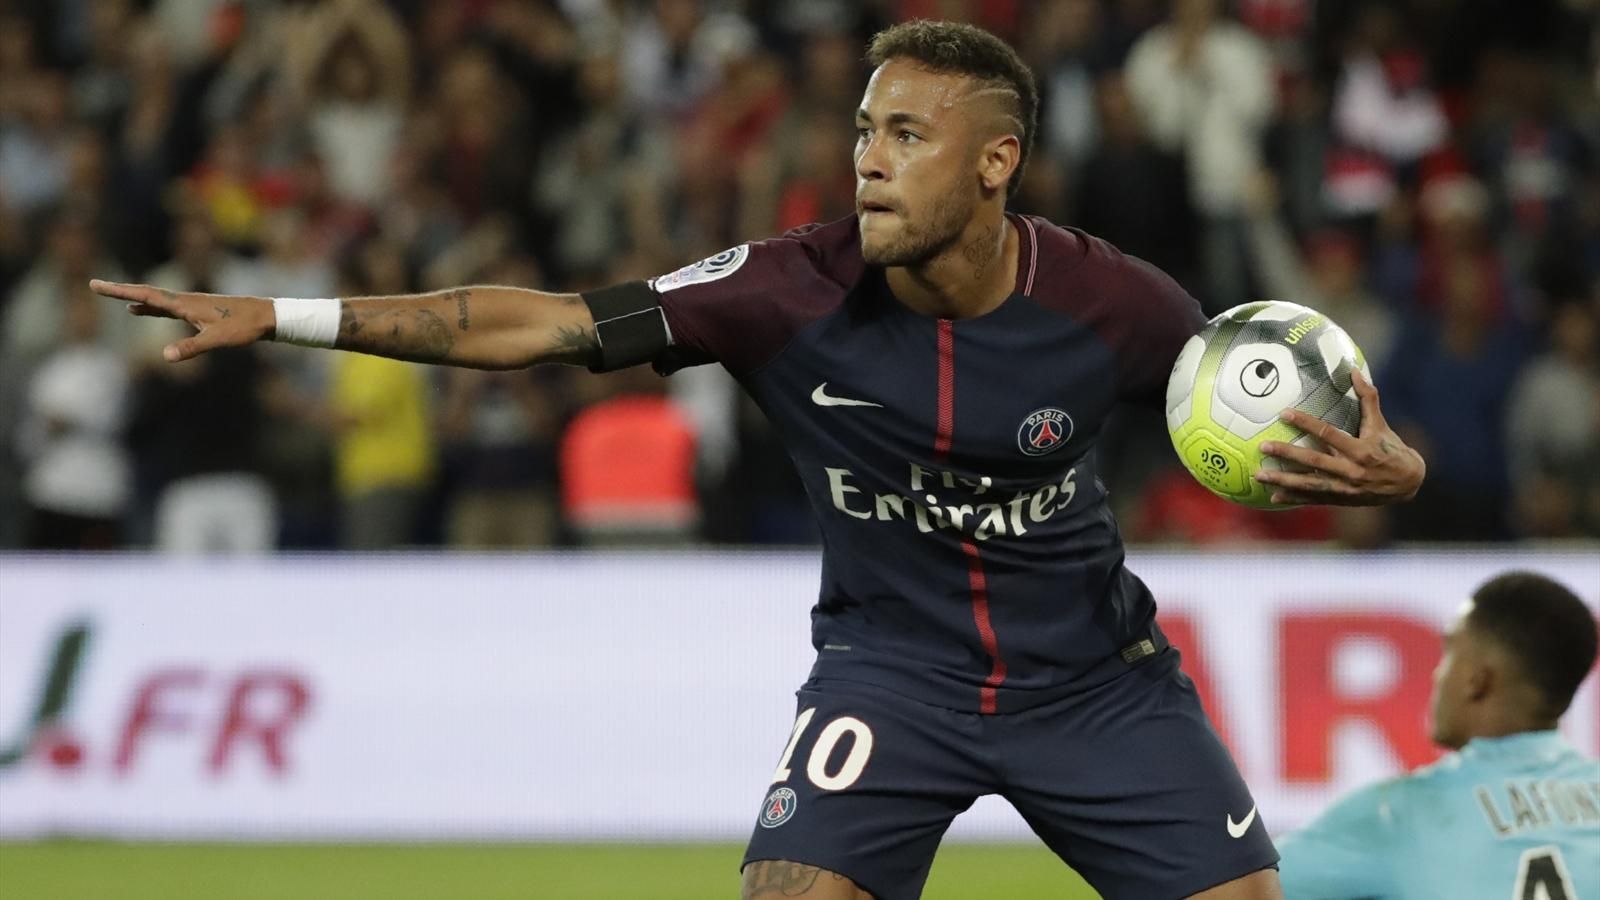 Neymar: These Three Years (at PSG) Came with a Lot of Knowledge